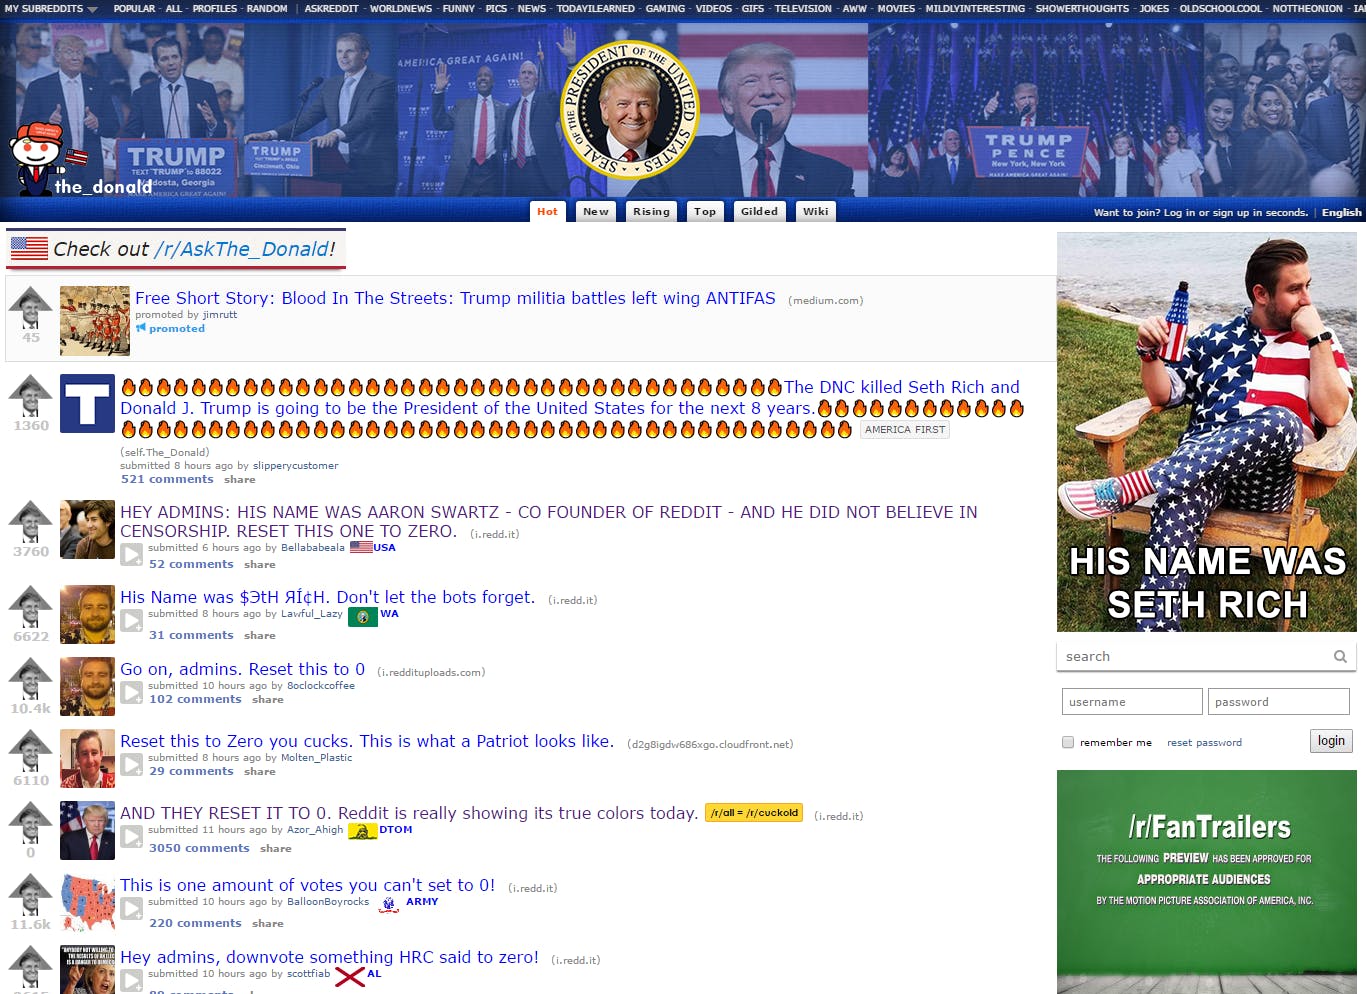 Reddit the Donald and 4chan : Seth Rich murder conspiracy